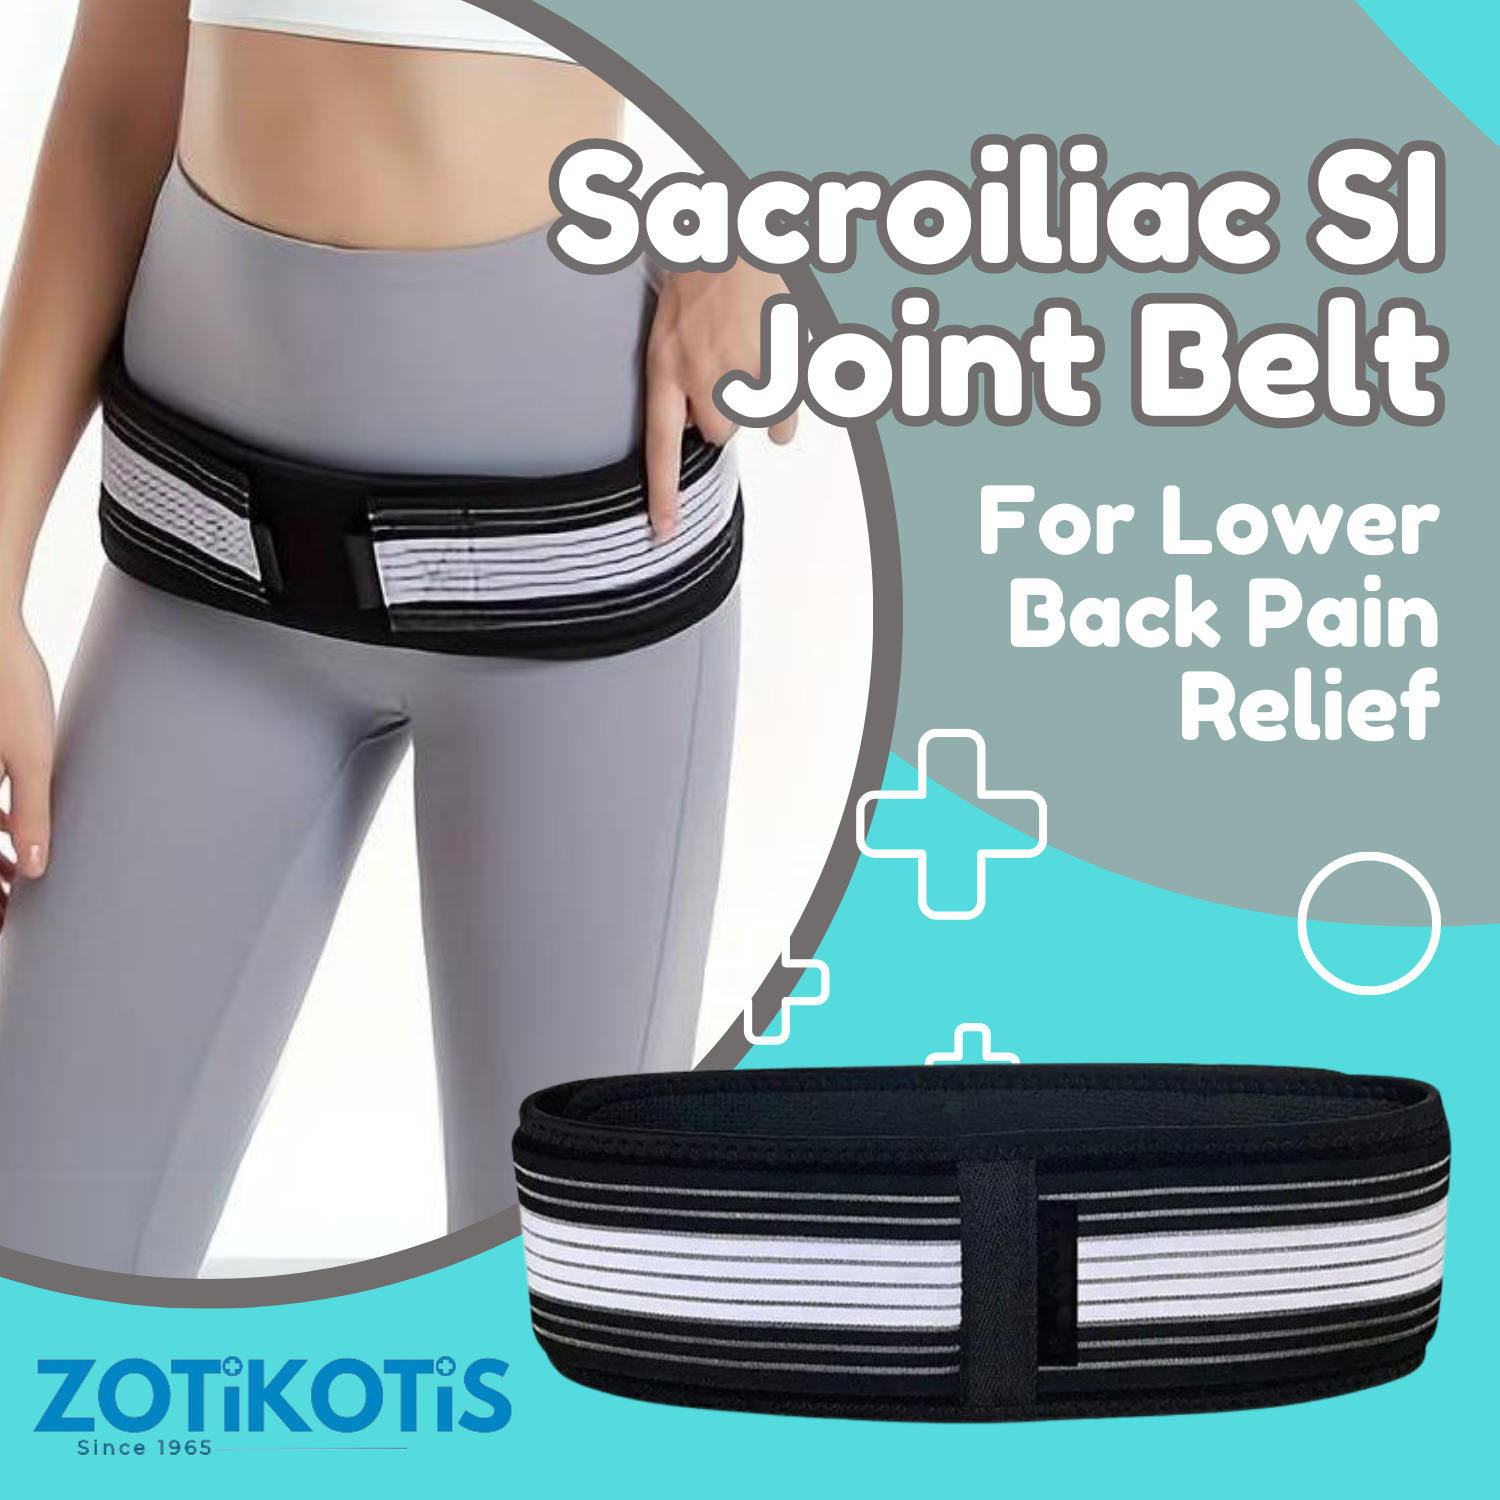 Sacroiliac SI Joint Belt For Lower Back Pain Relief-7